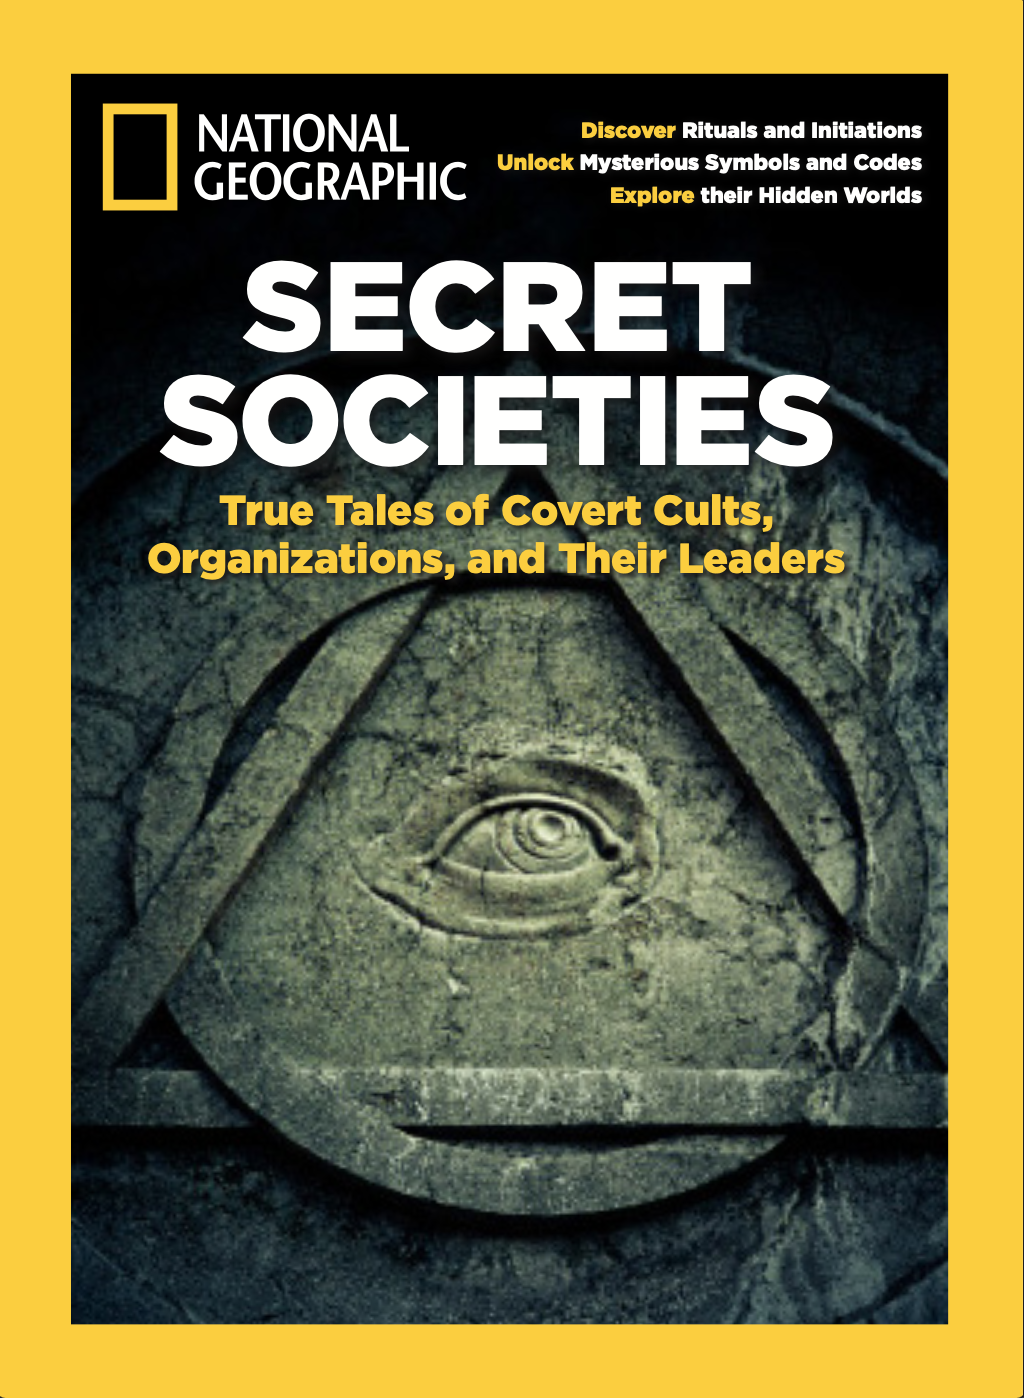 NAT GEO SPECIAL EDITION COVERS - 